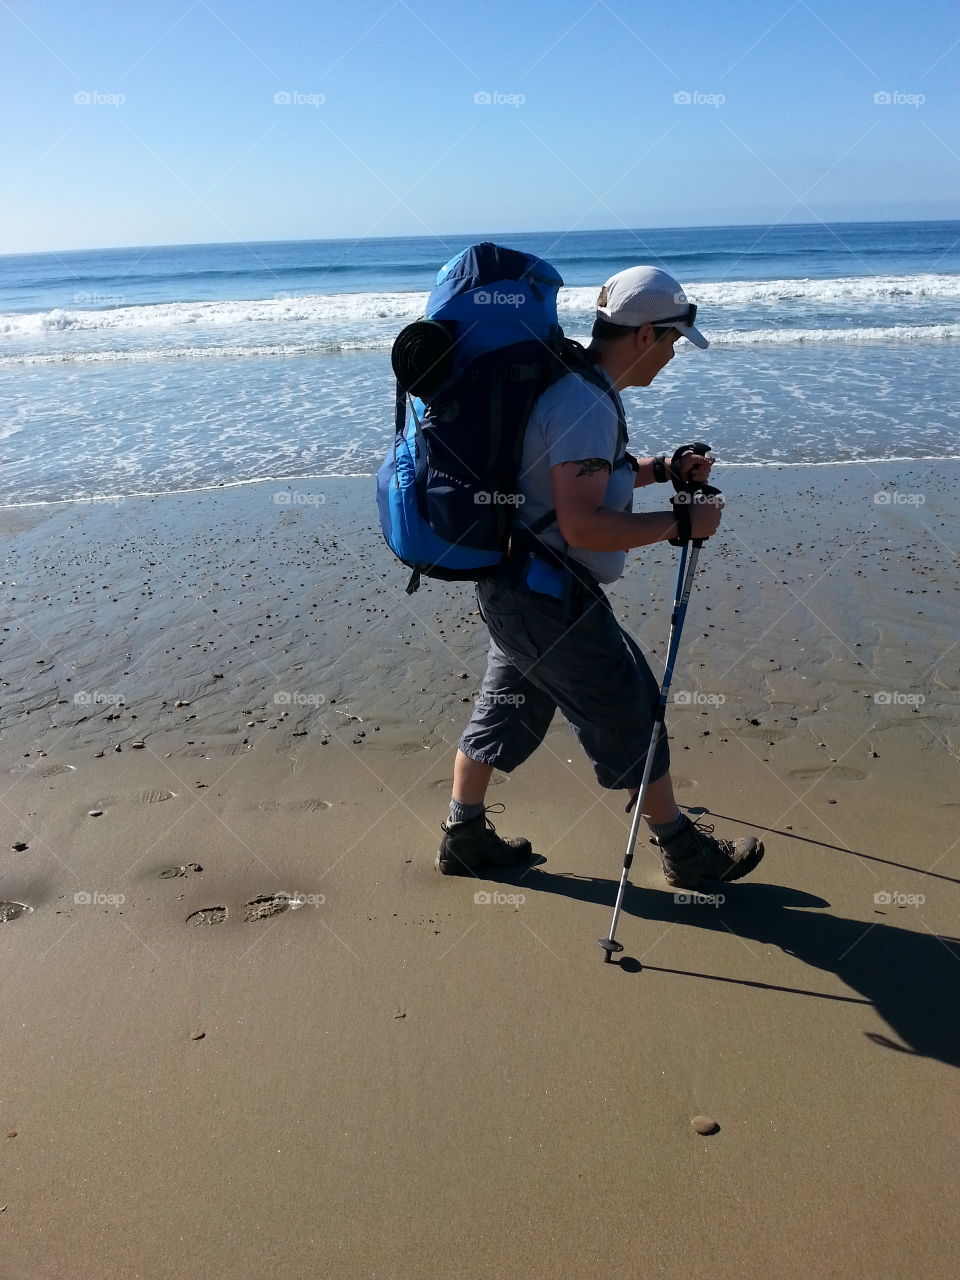 hiking on the beach. point reyes, ca